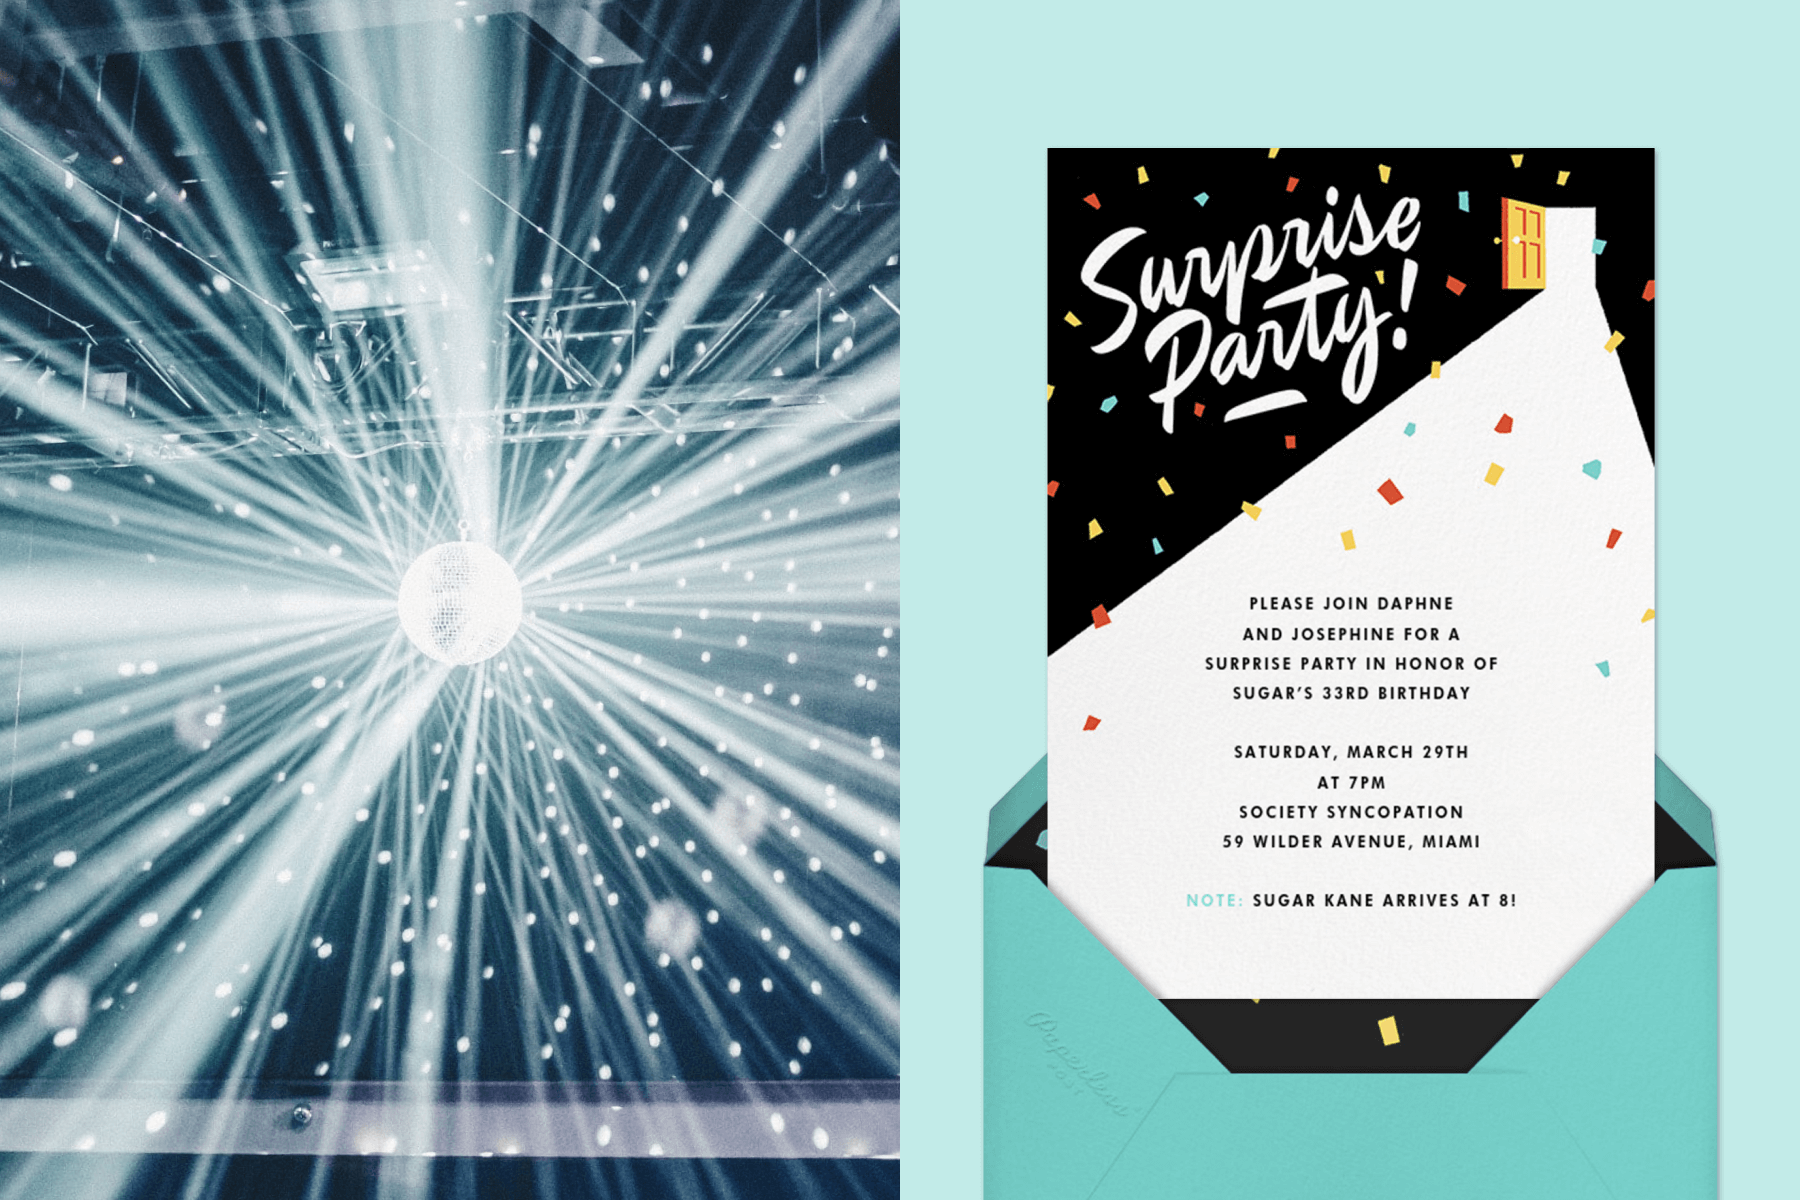 left: A disco ball hanging from a club ceiling. Right: An invitation shows a door opening into a dark room filled with confetti and the words “Surprise party!”